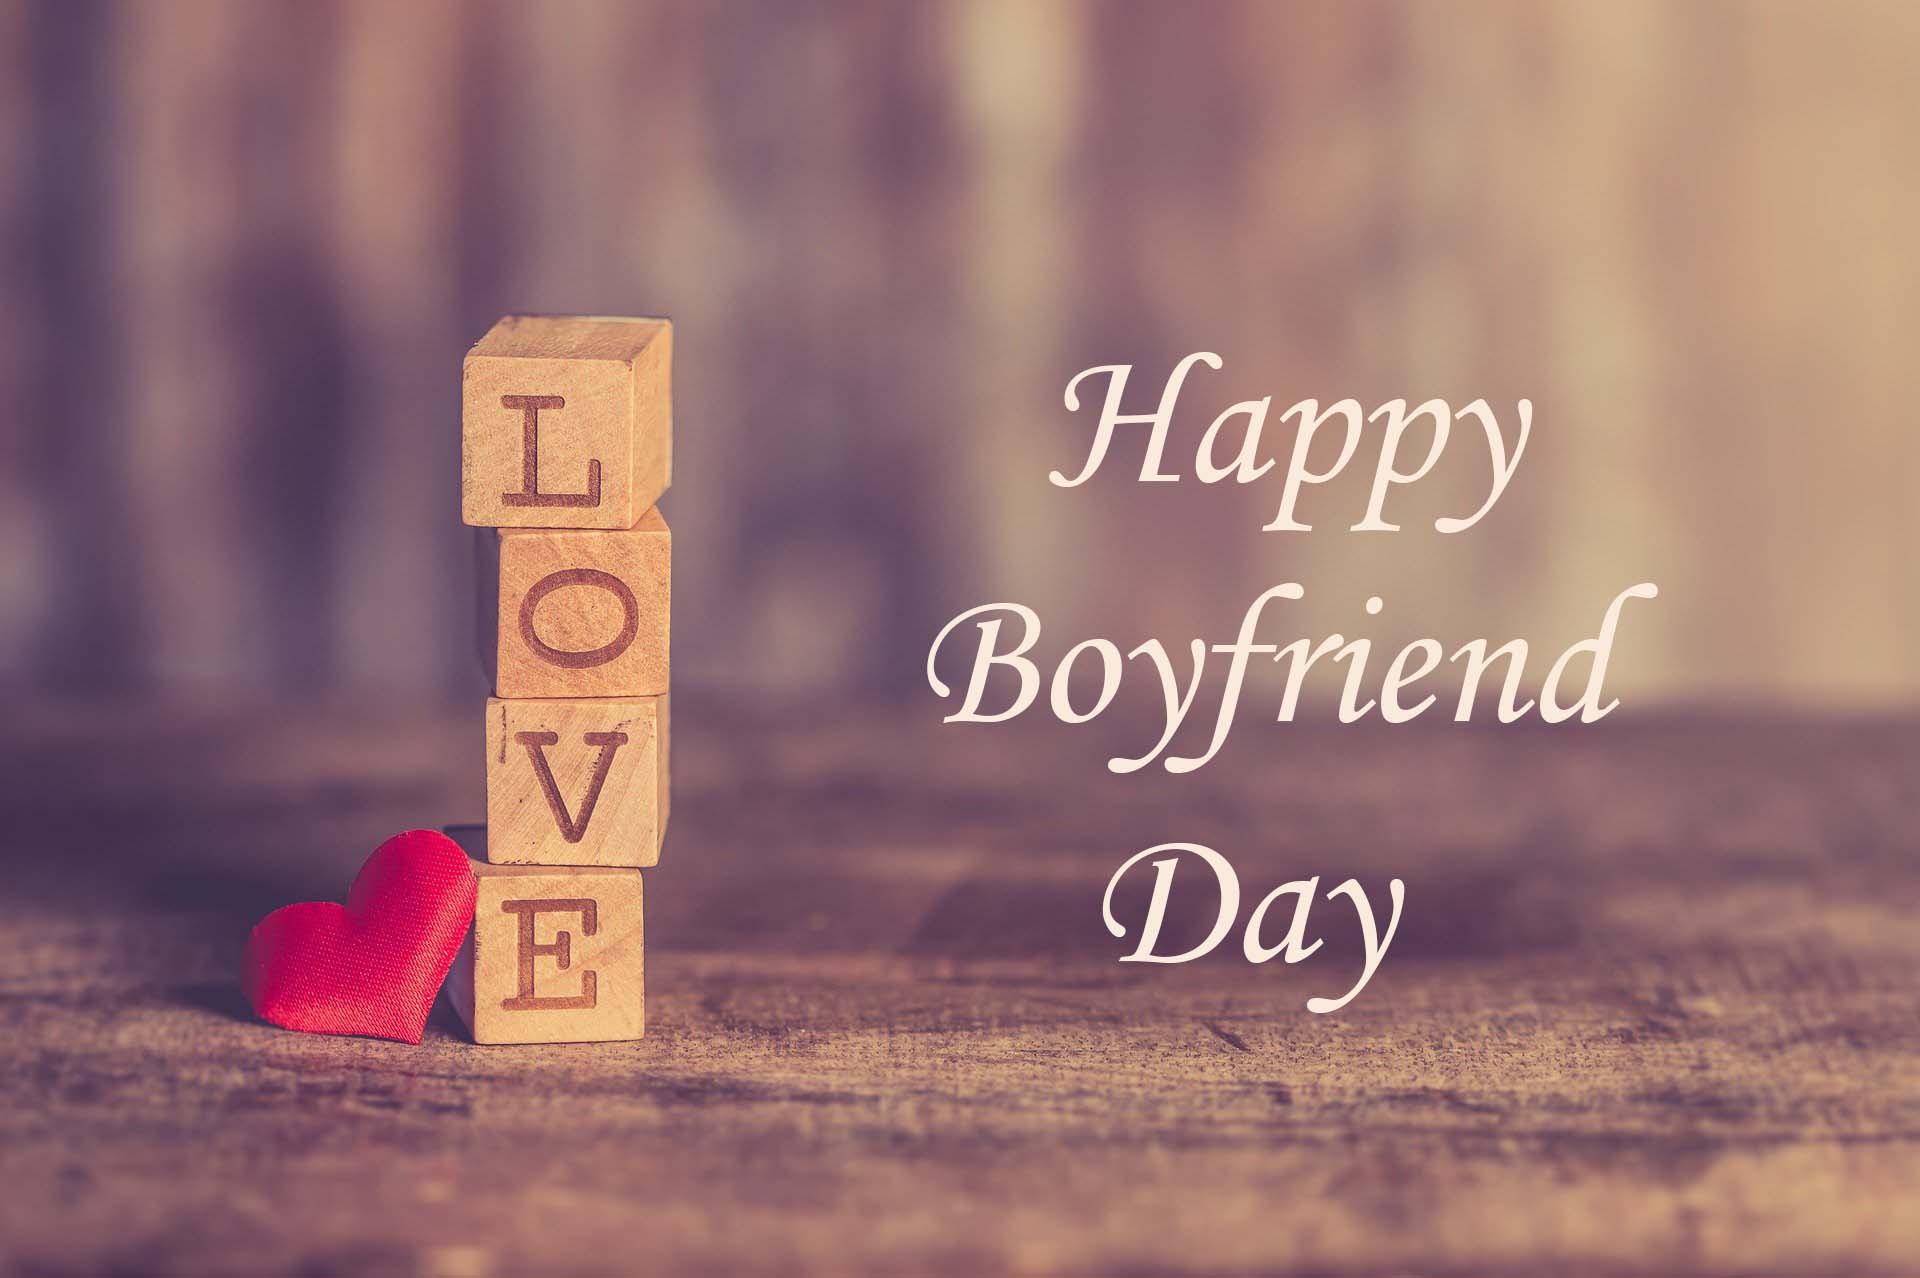 Happy National Boyfriend Day 2022 Images, Wishes and Quotes